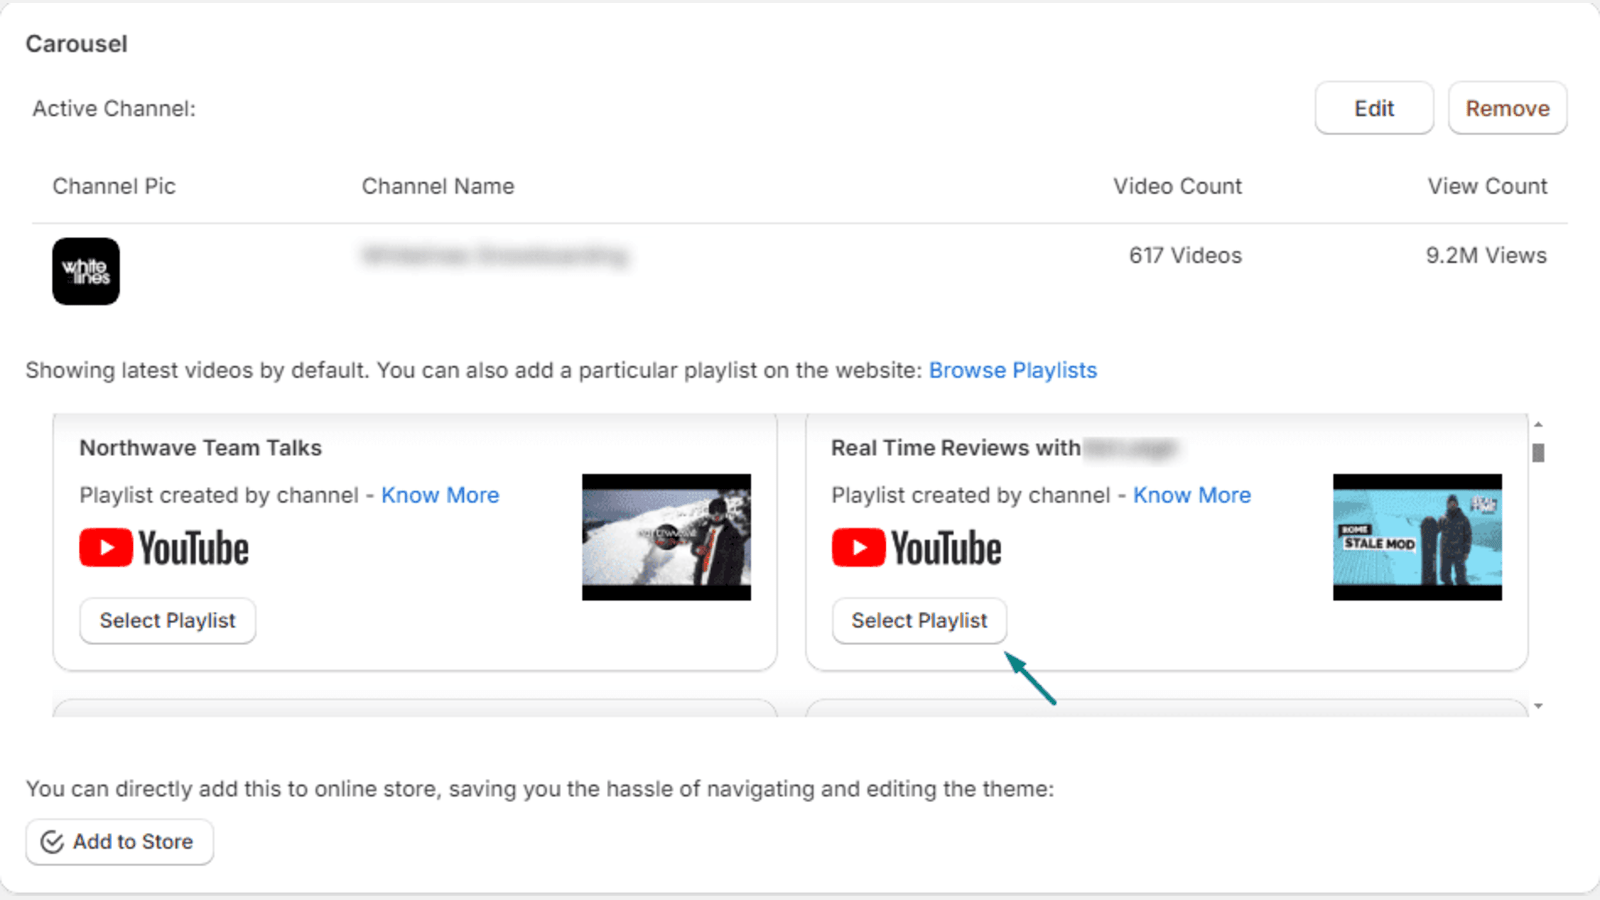 Choose Channel. Select Specific Playlist. Add directly to Store.